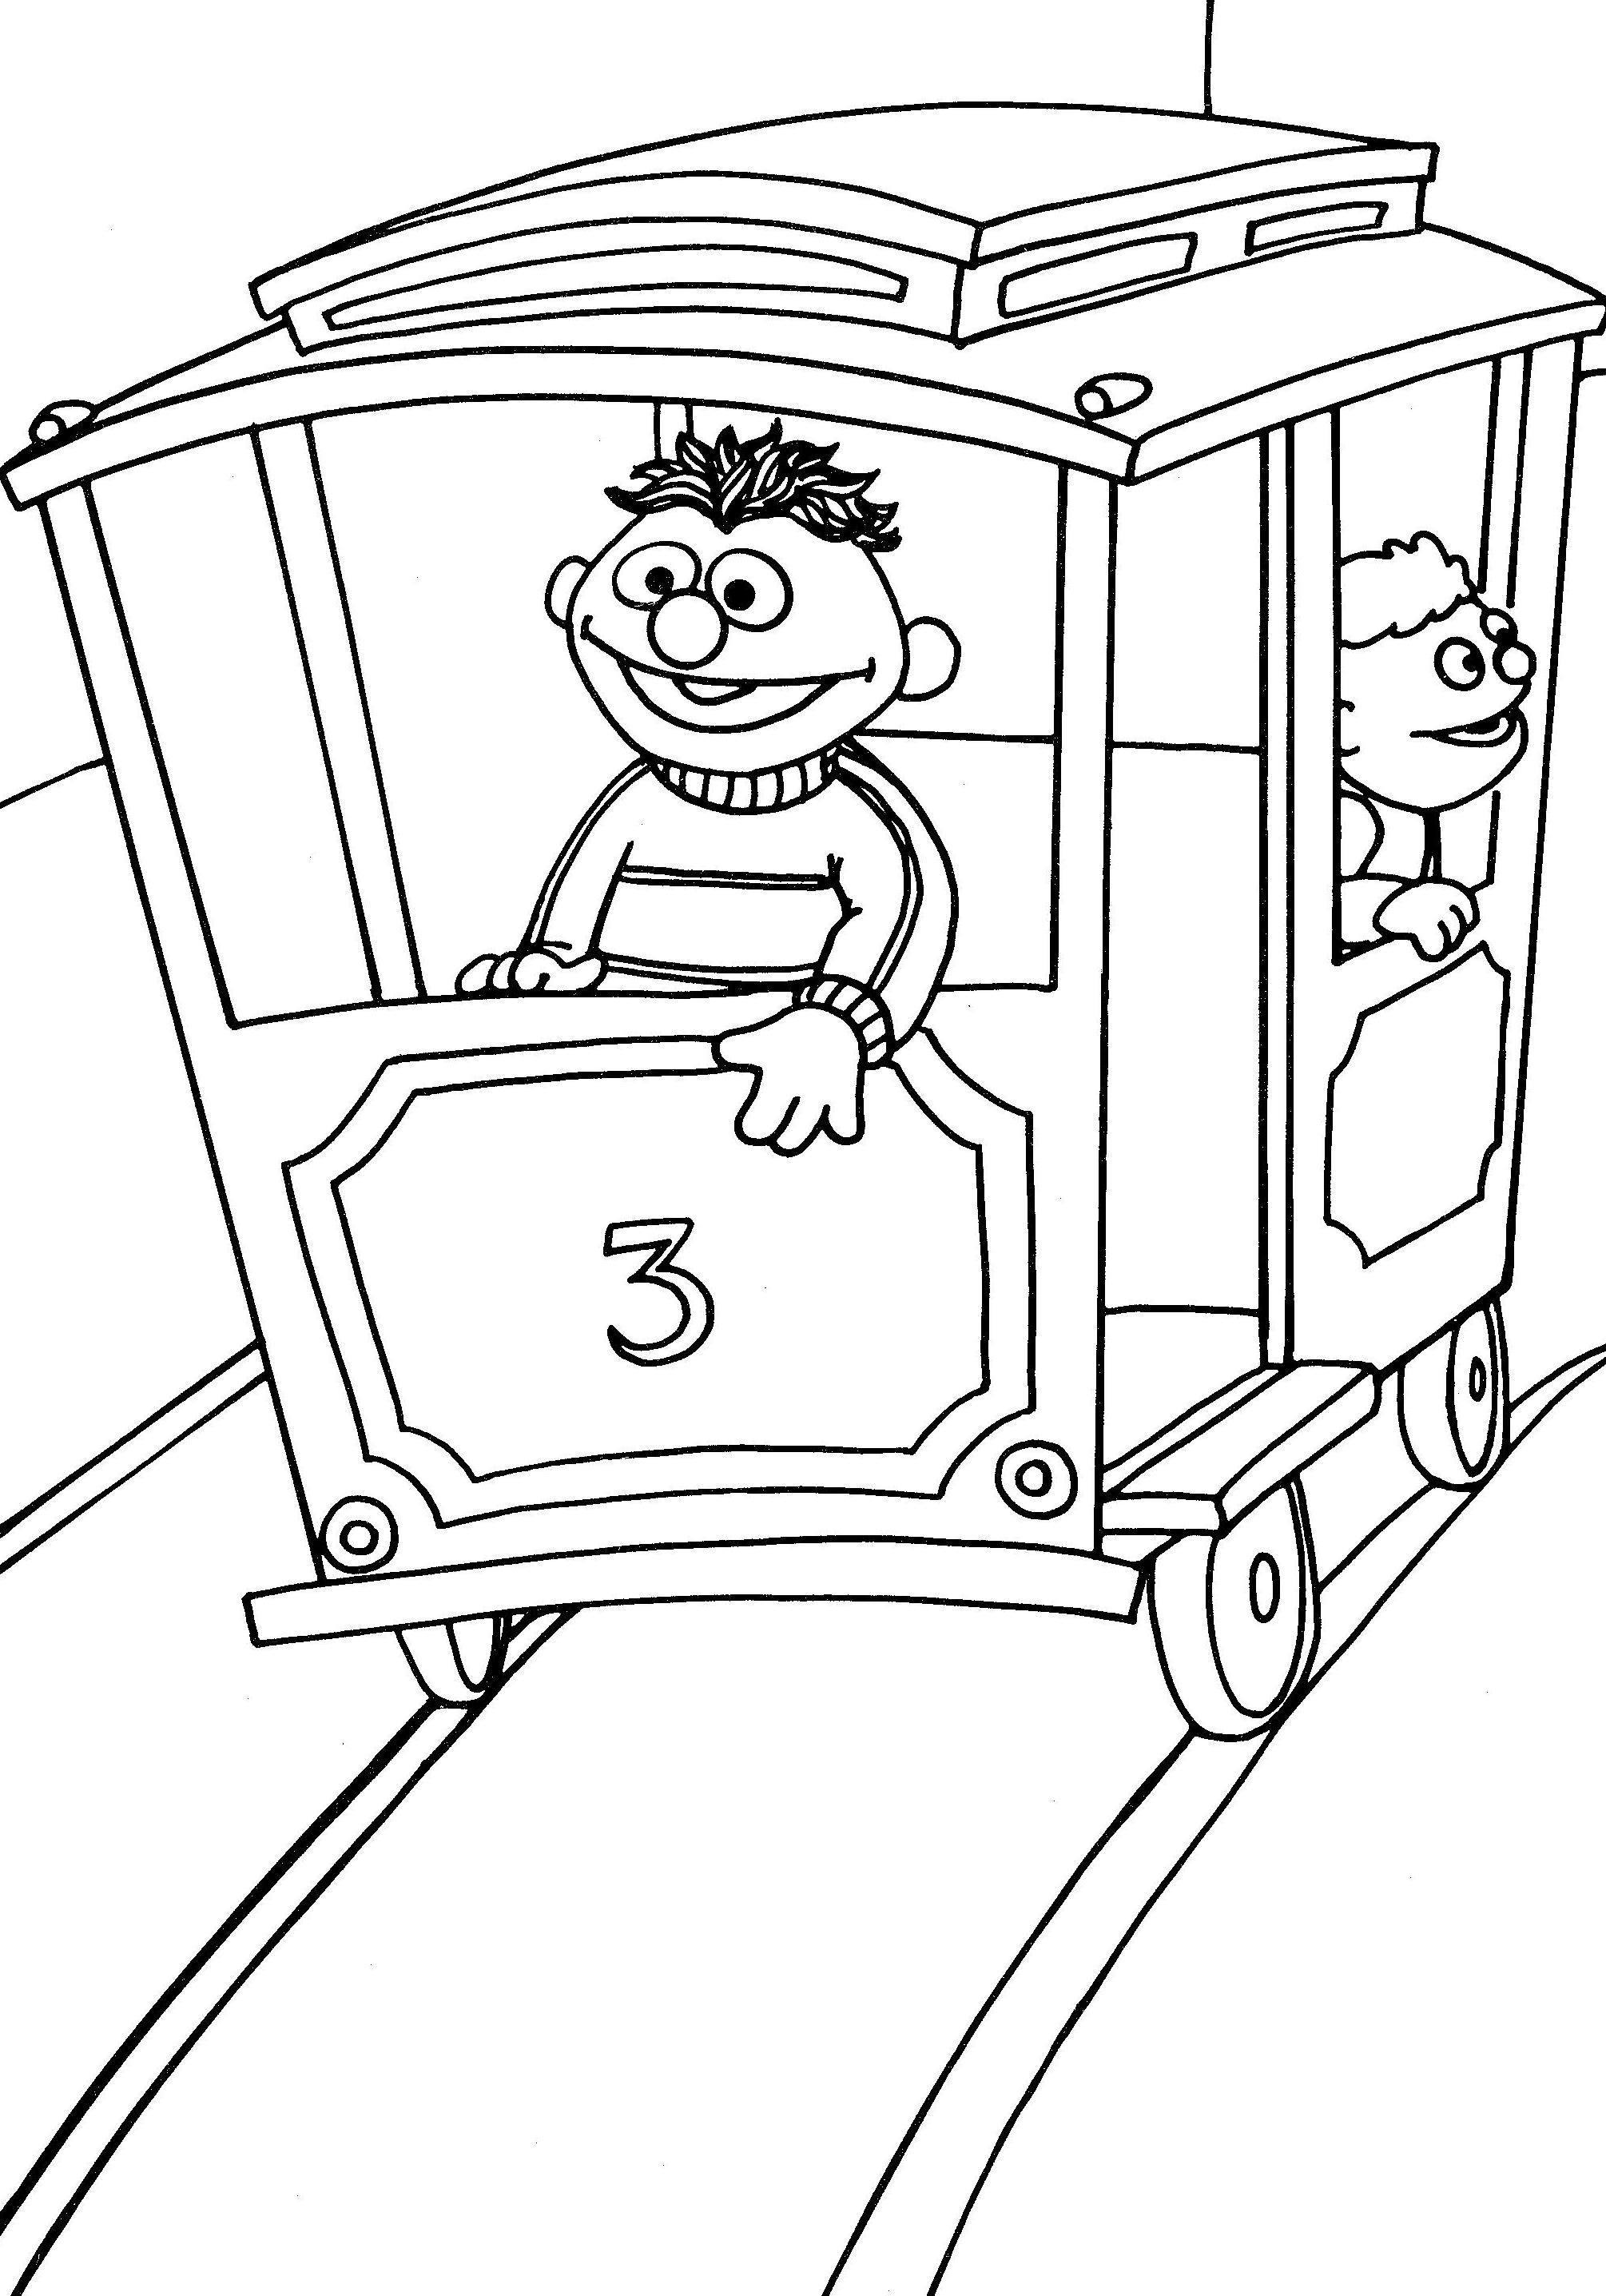 San Francisco Trolley Coloring Page - Get Coloring Pages